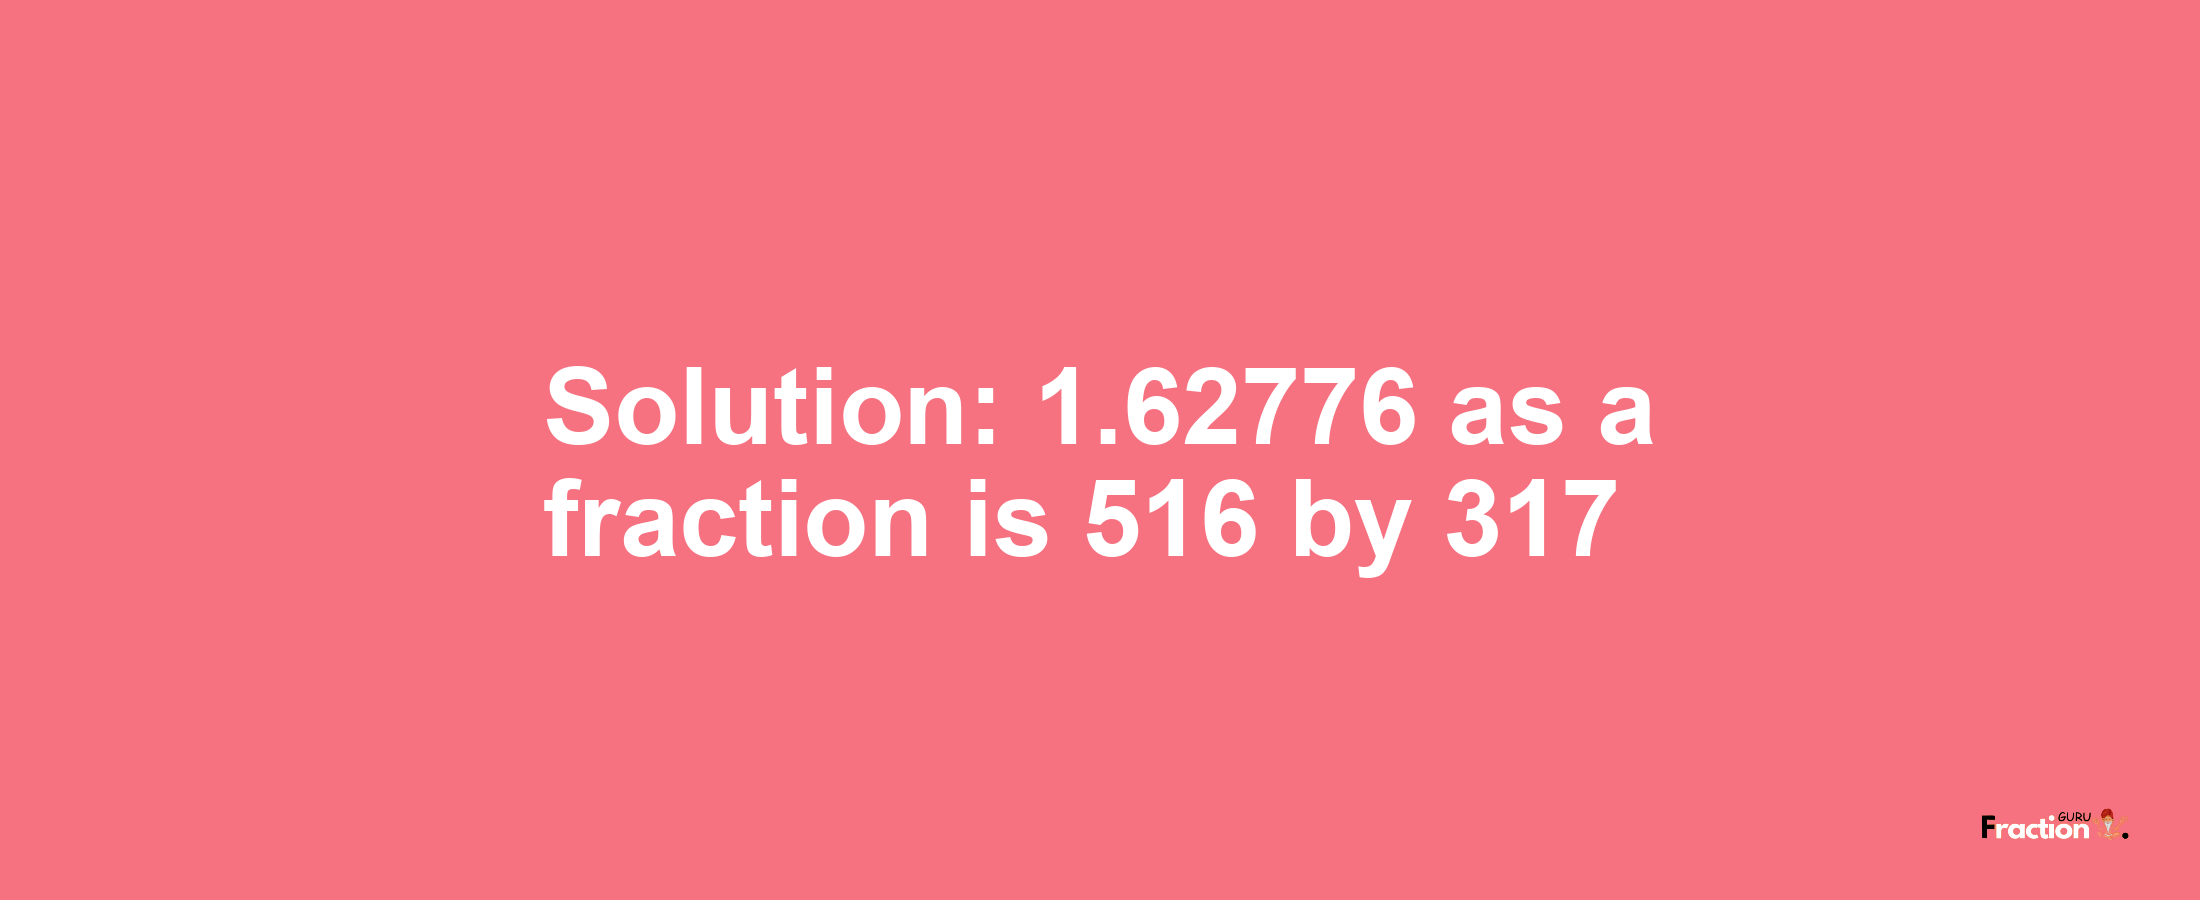 Solution:1.62776 as a fraction is 516/317